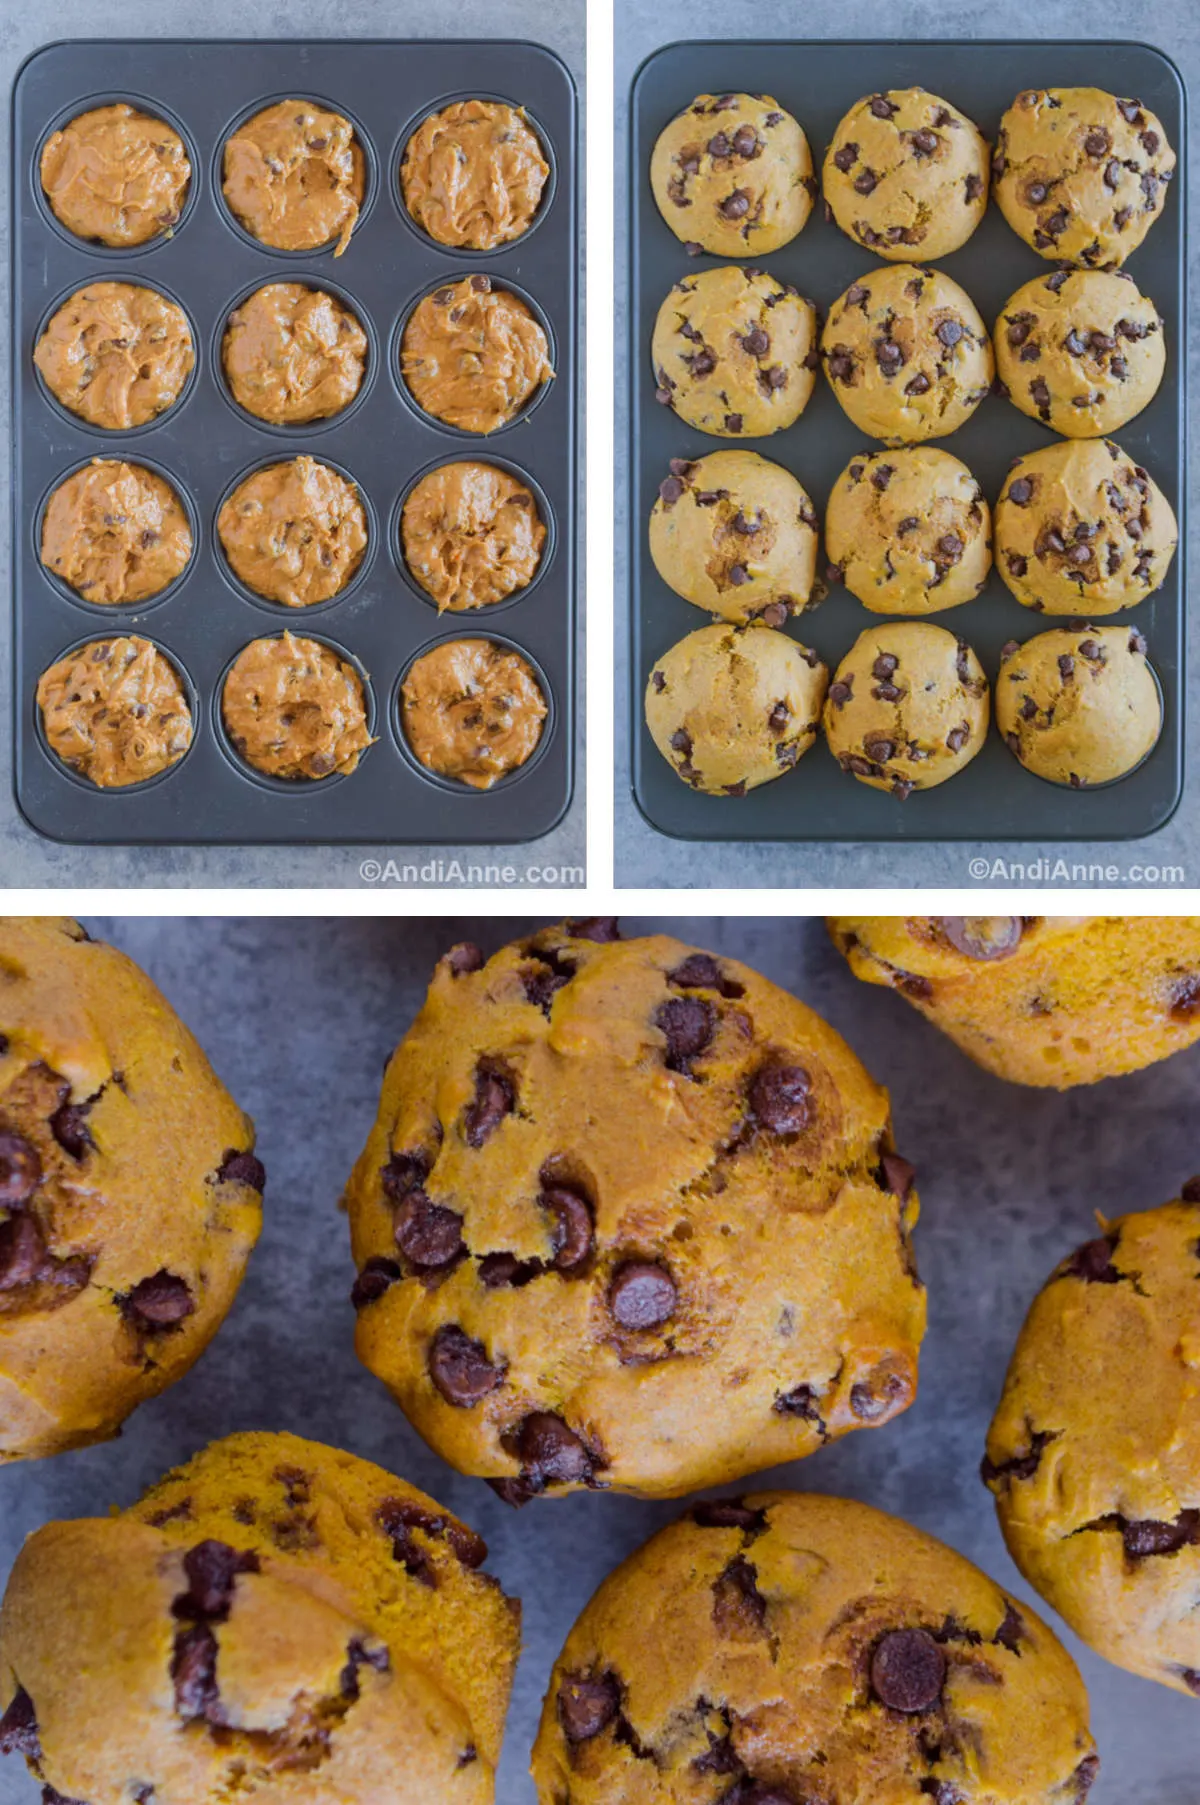 Three overhead images in one: 1. Batter is placed into muffin tray. 2. Baked muffins in the tray. 3. Closeup of muffins pulled from the tray. 